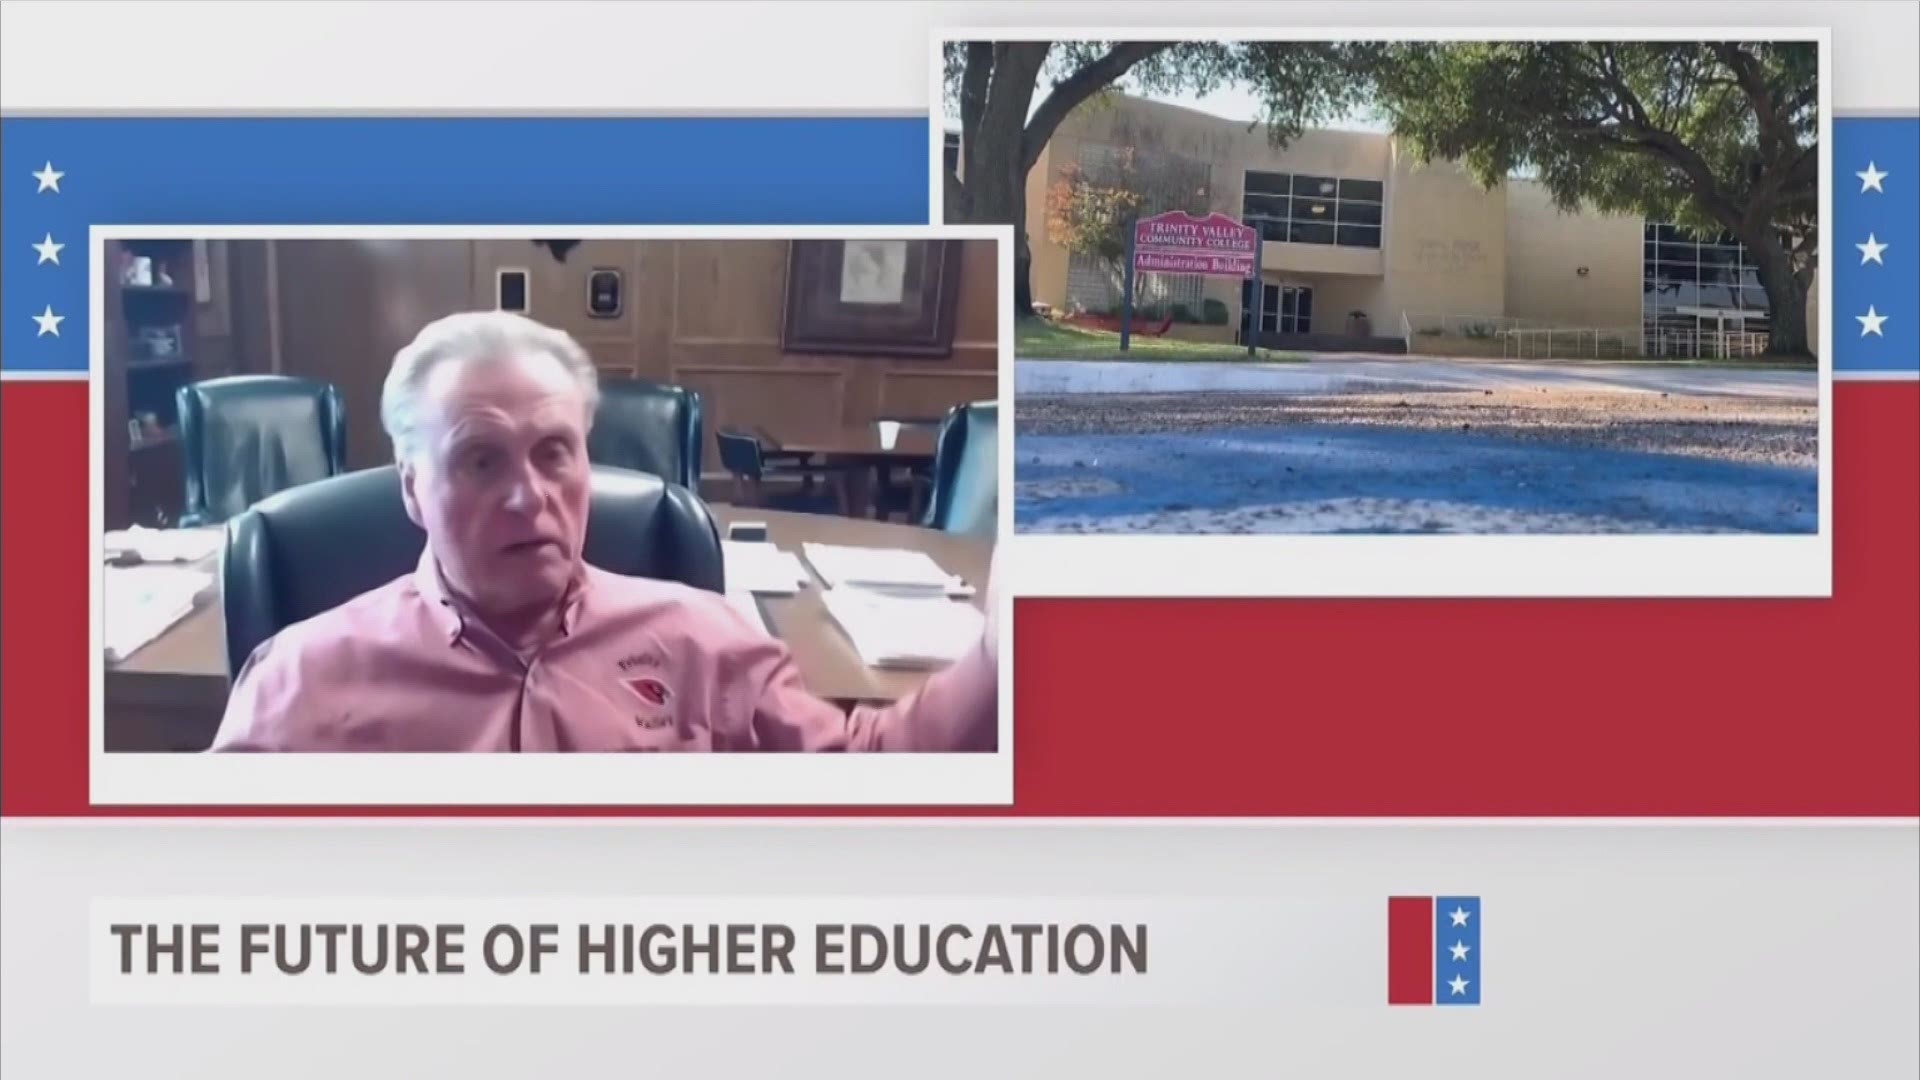 The second part of an interview with Trinity Valley Community College's president about how COVID-19 will shape the future of higher education